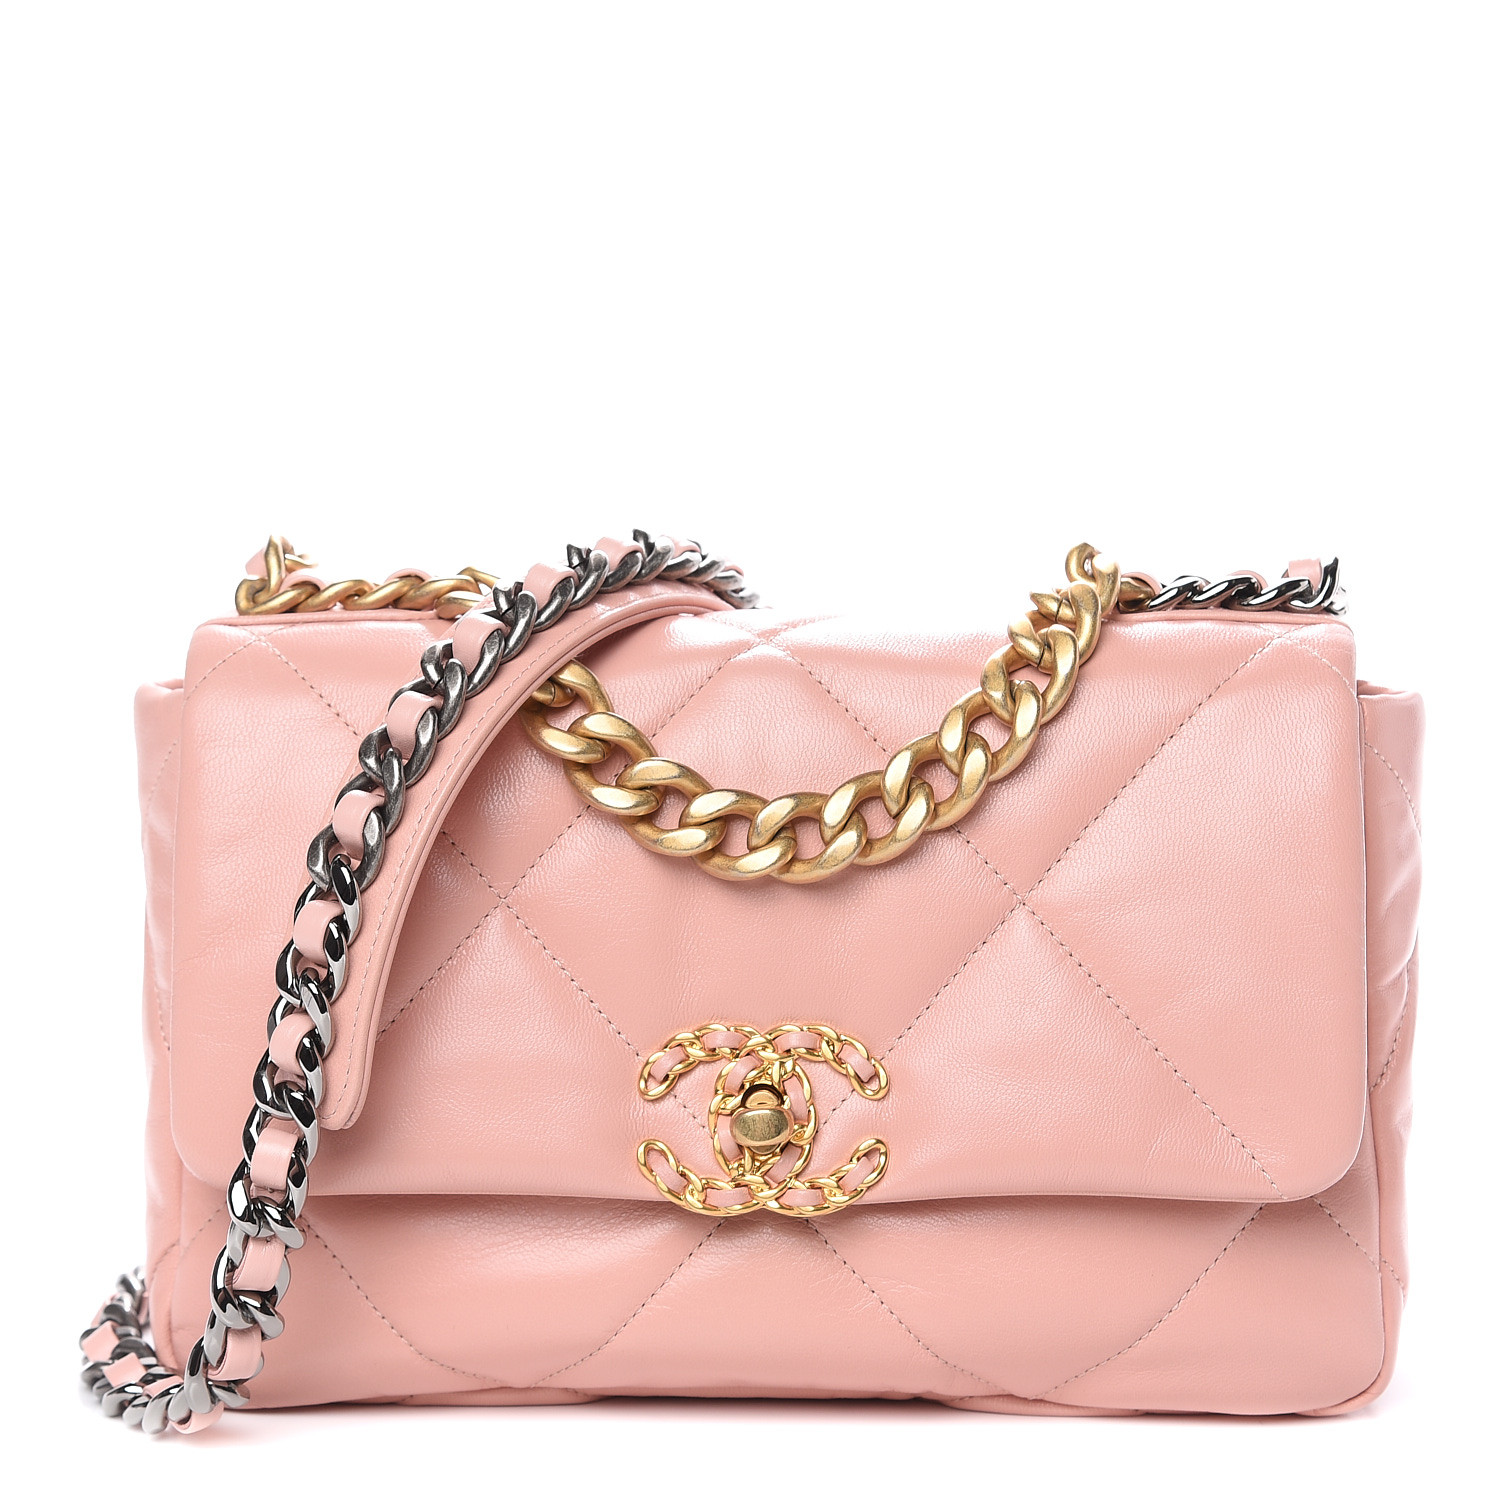 CHANEL Goatskin Quilted Medium Chanel 19 Flap Light Pink 490621